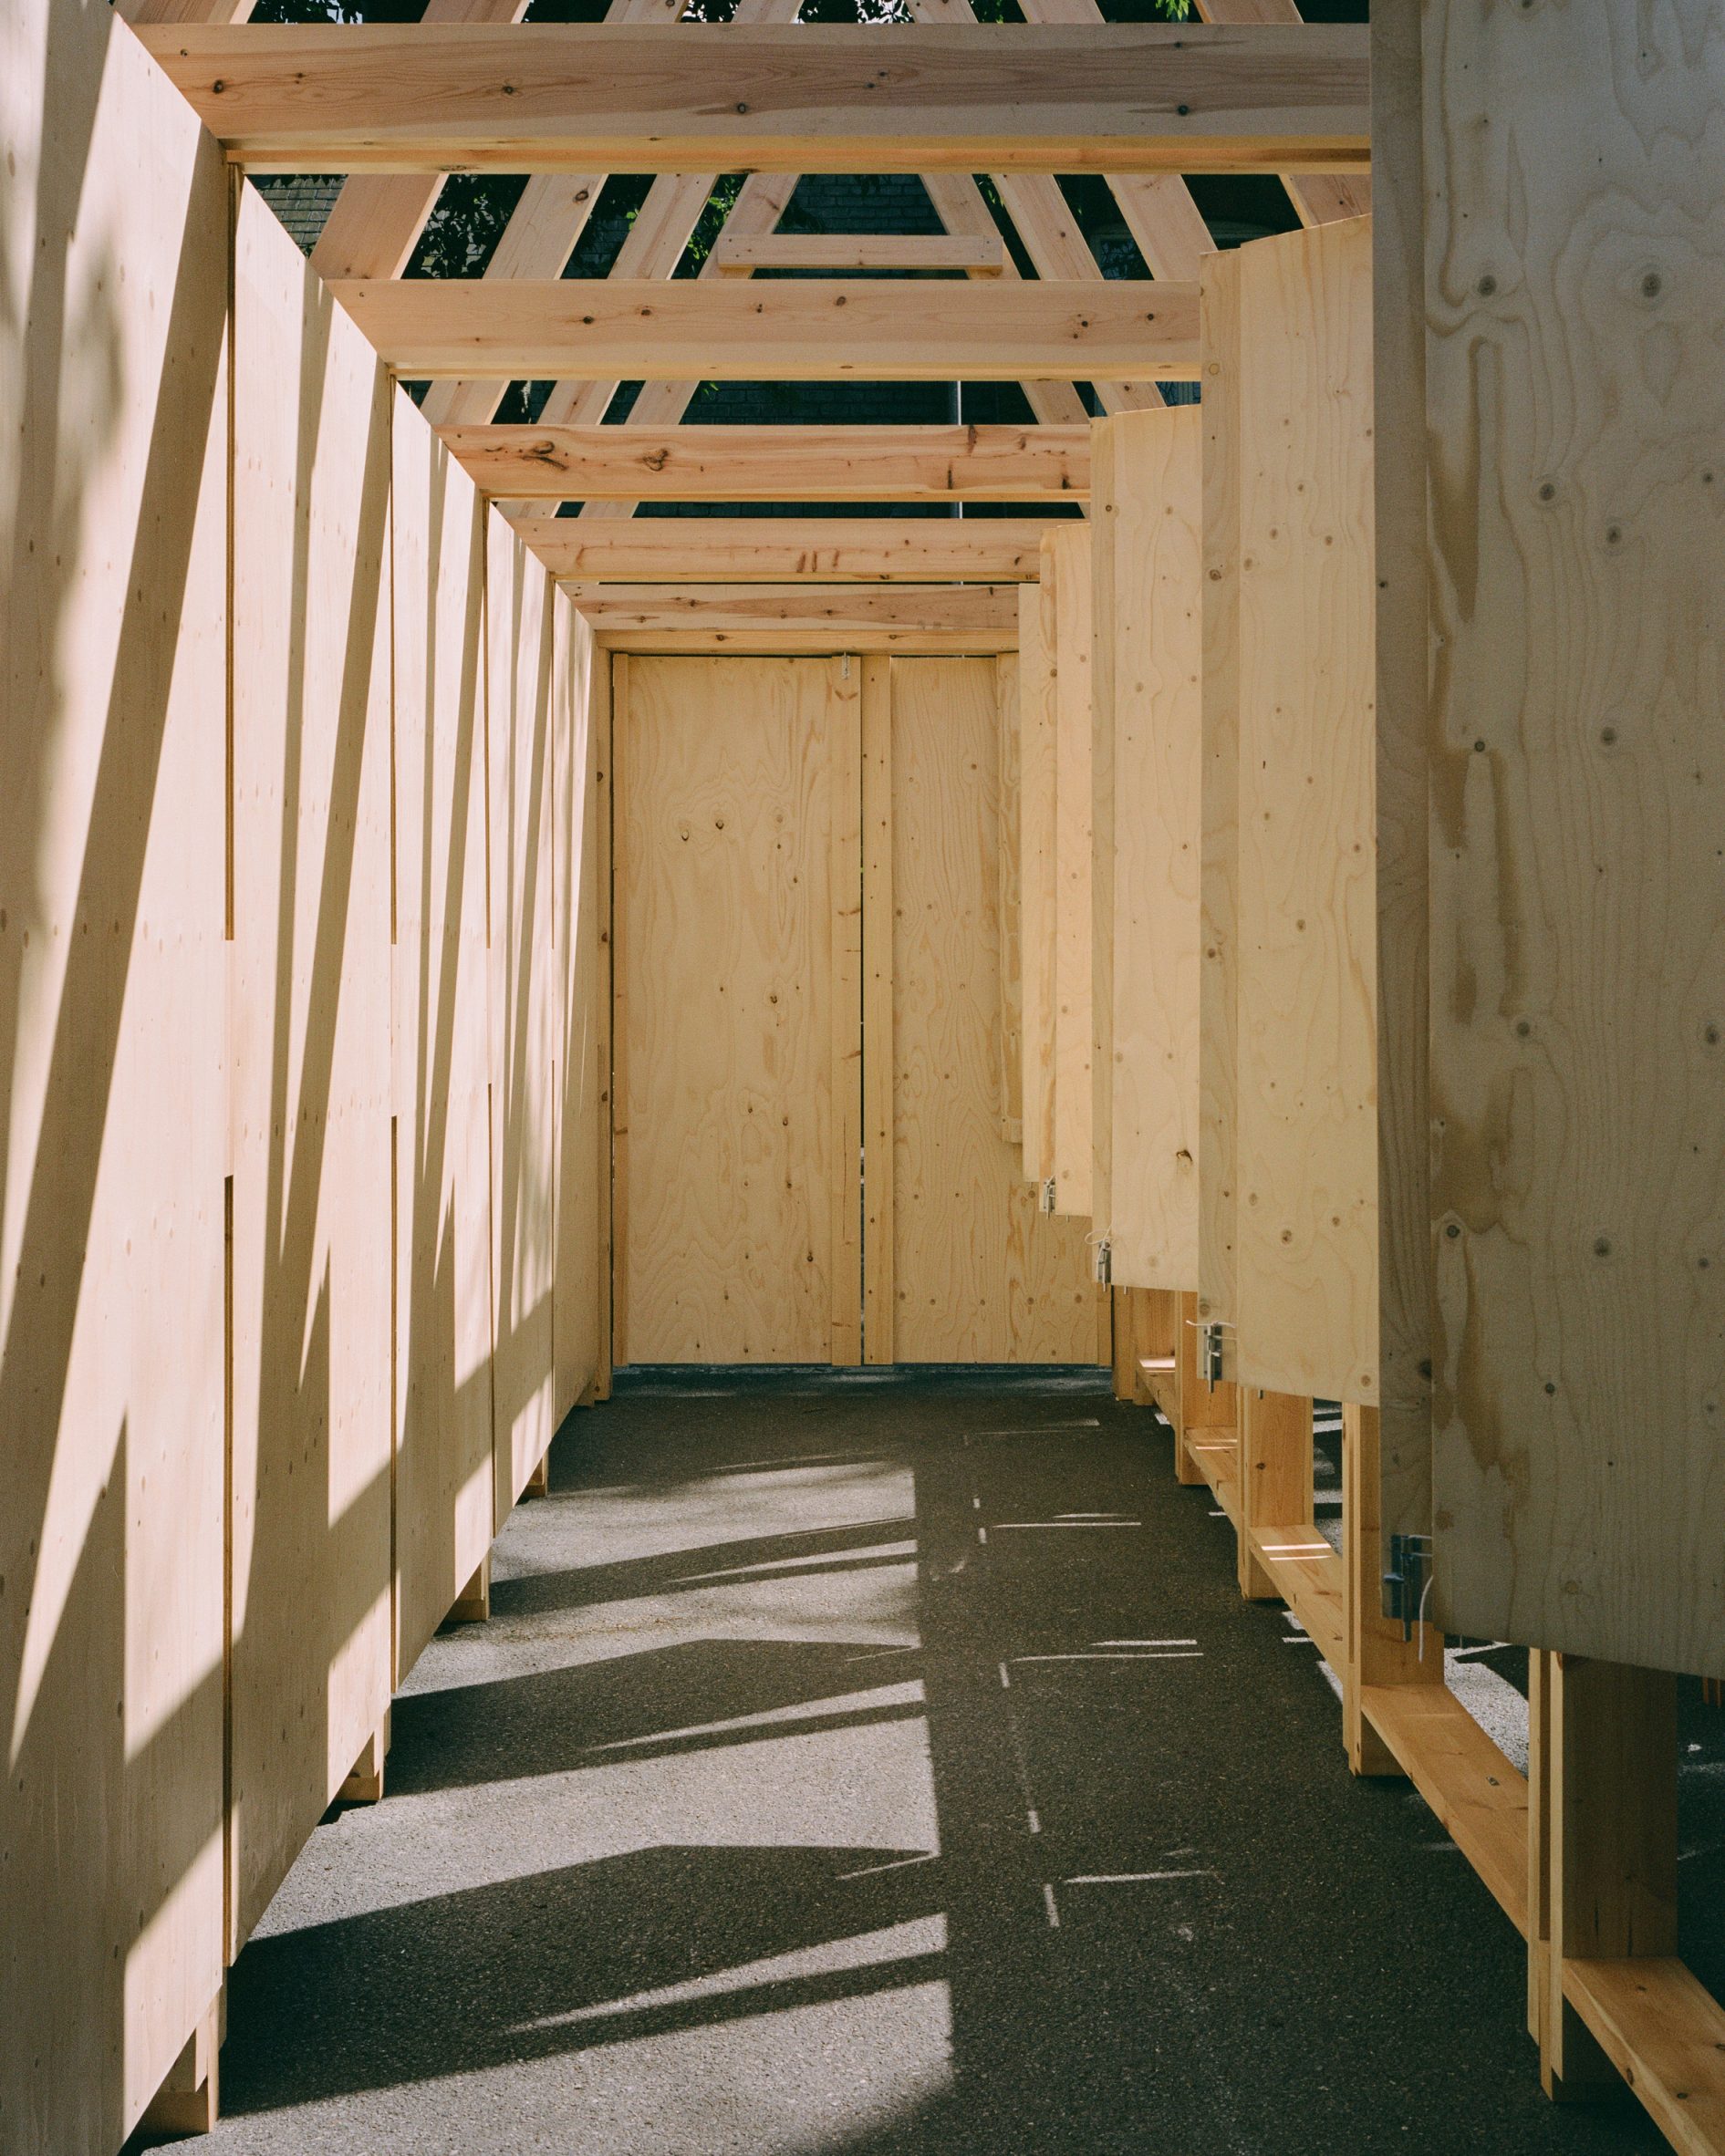 View within The Dalston Pavilion by LSA